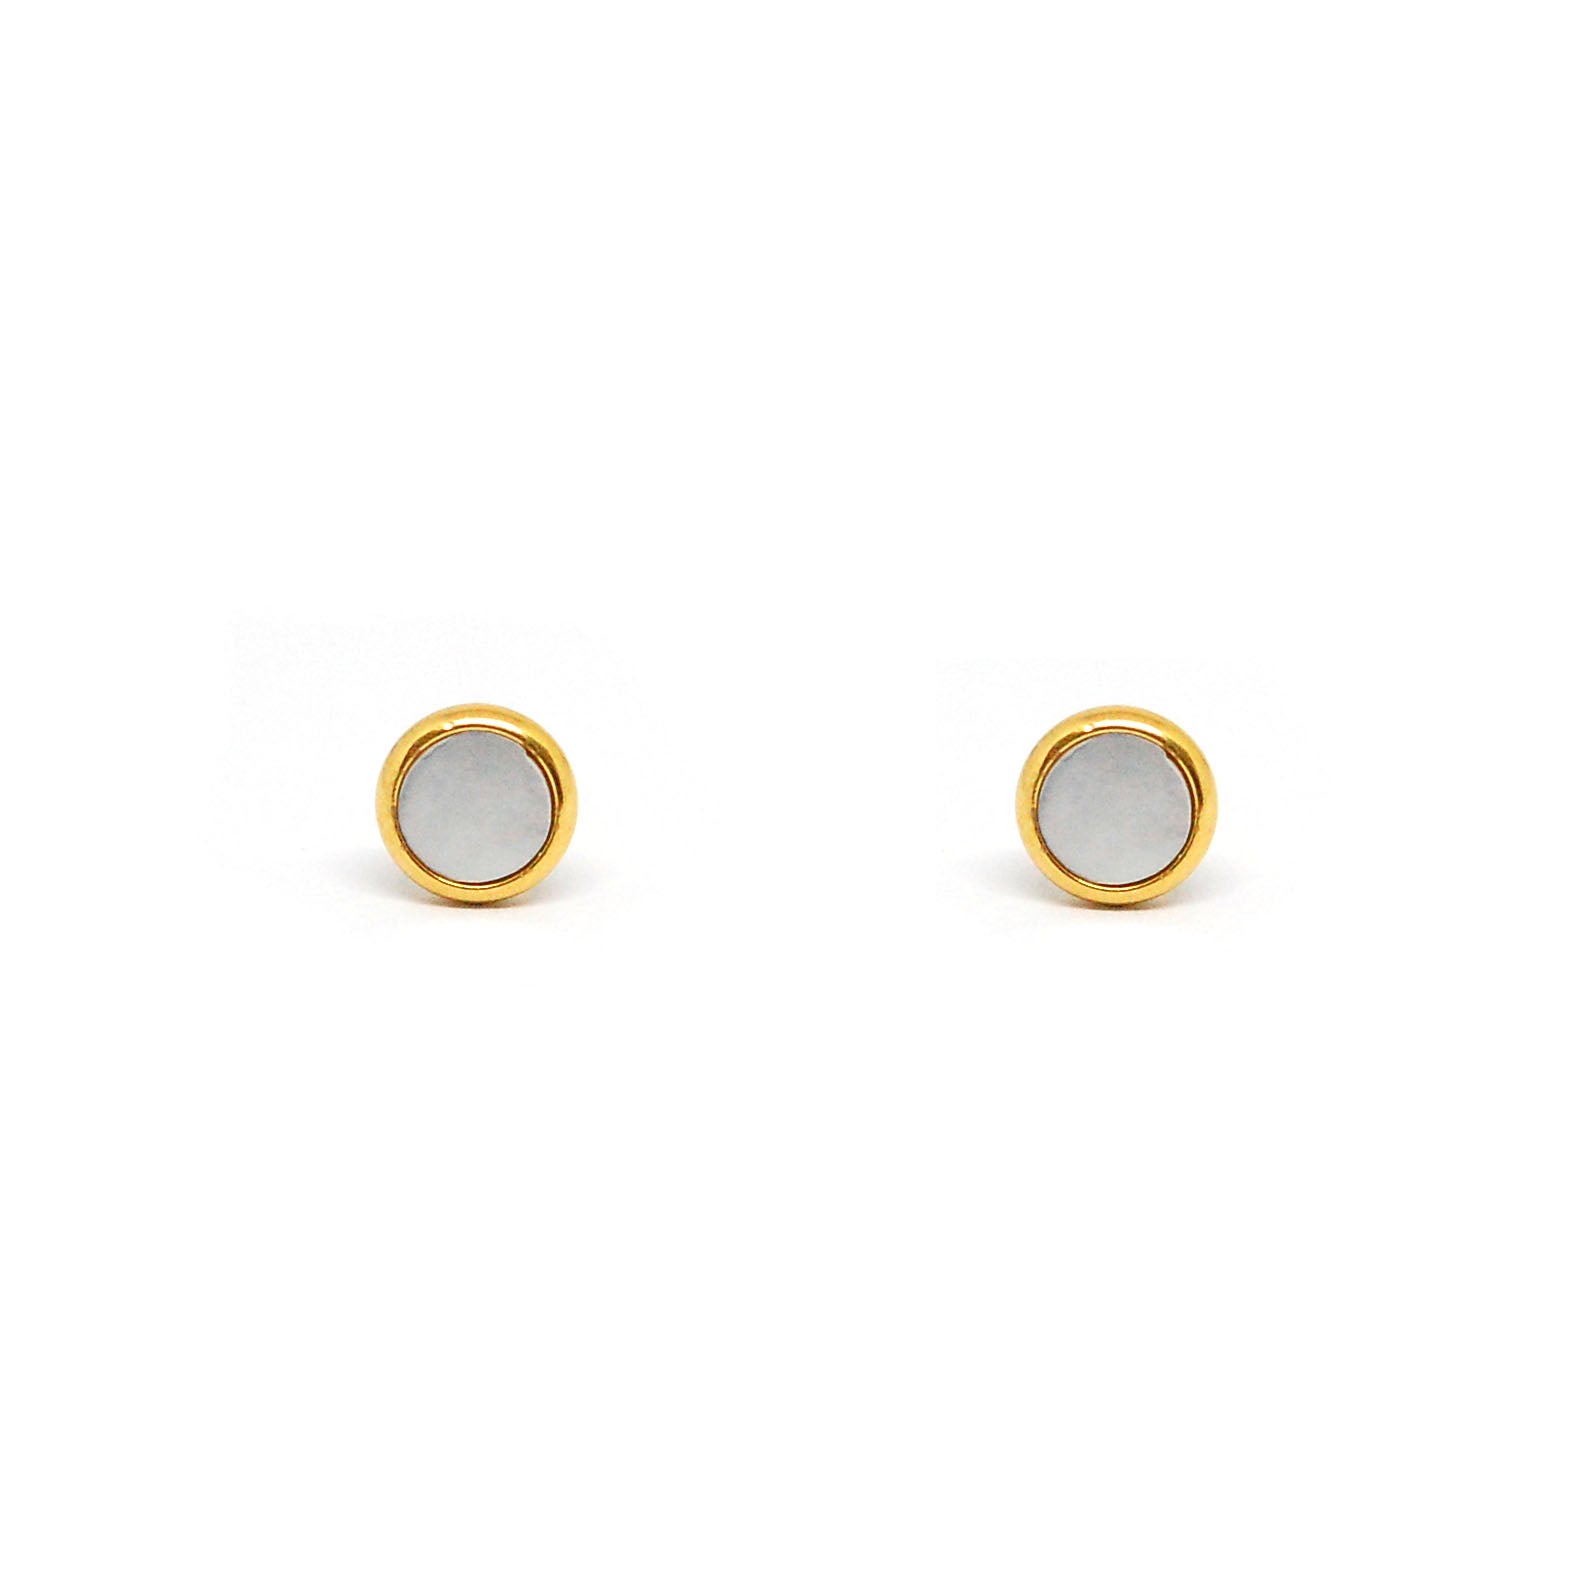 ESE 8077: All IPG Enclosed 6mm Mother of Pearl Studs w/ Baby Safe Chapita